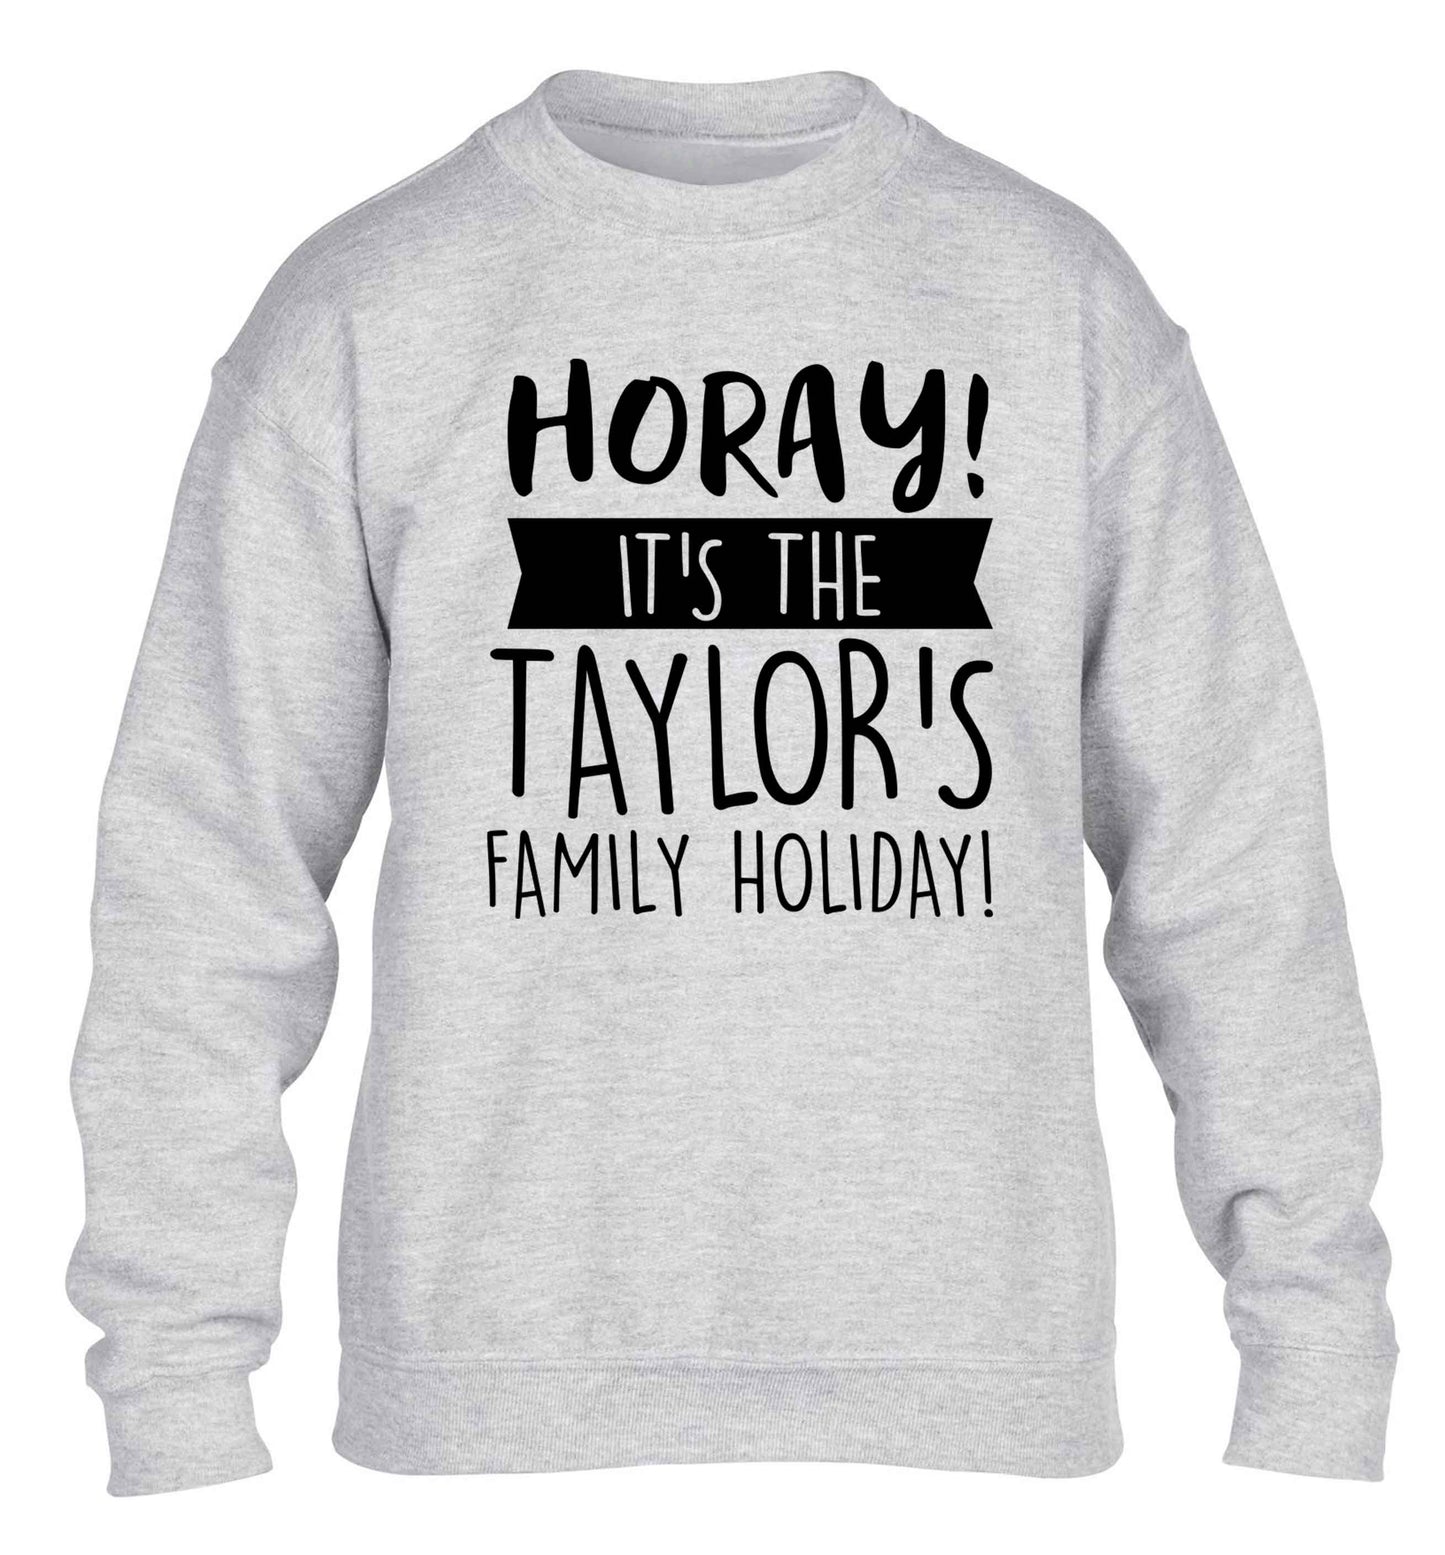 Horay it's the Taylor's family holiday! personalised item children's grey sweater 12-13 Years